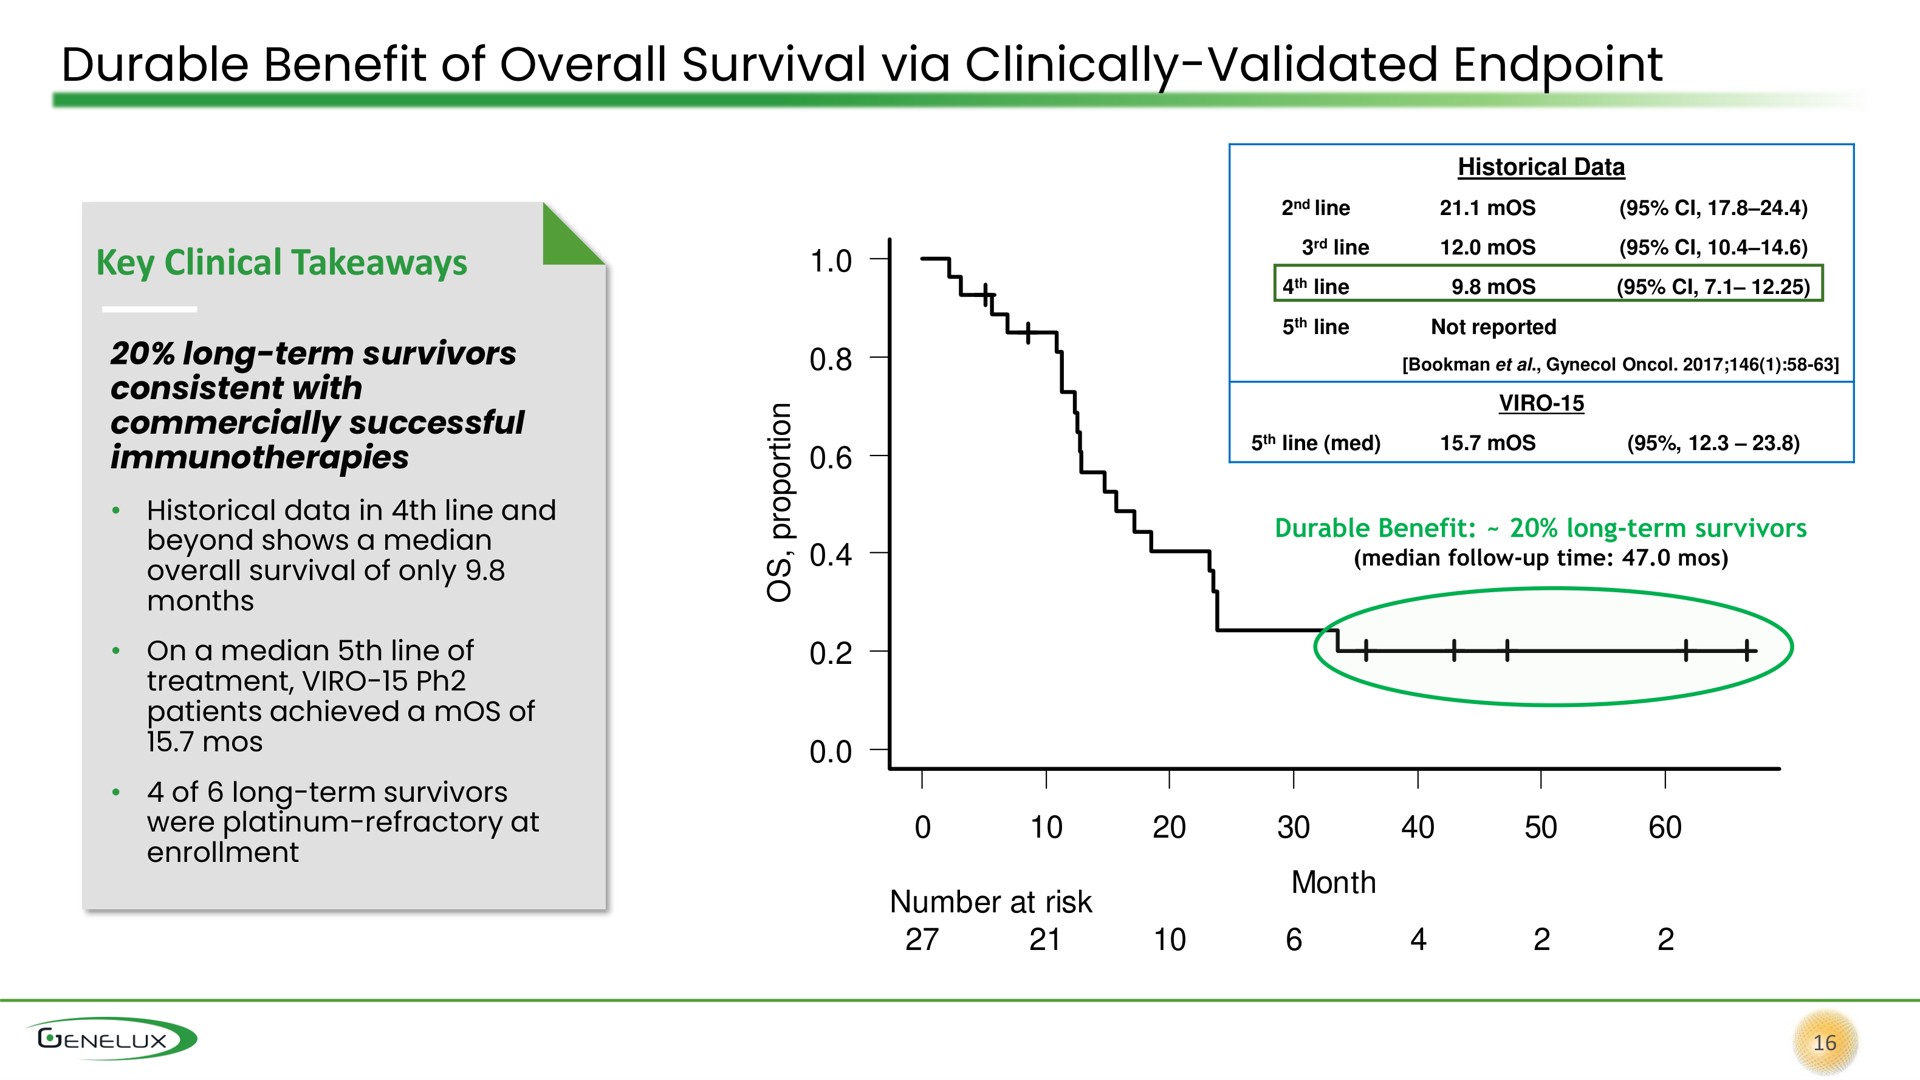 durable benefit of overall survival via clinically validated | Genelux